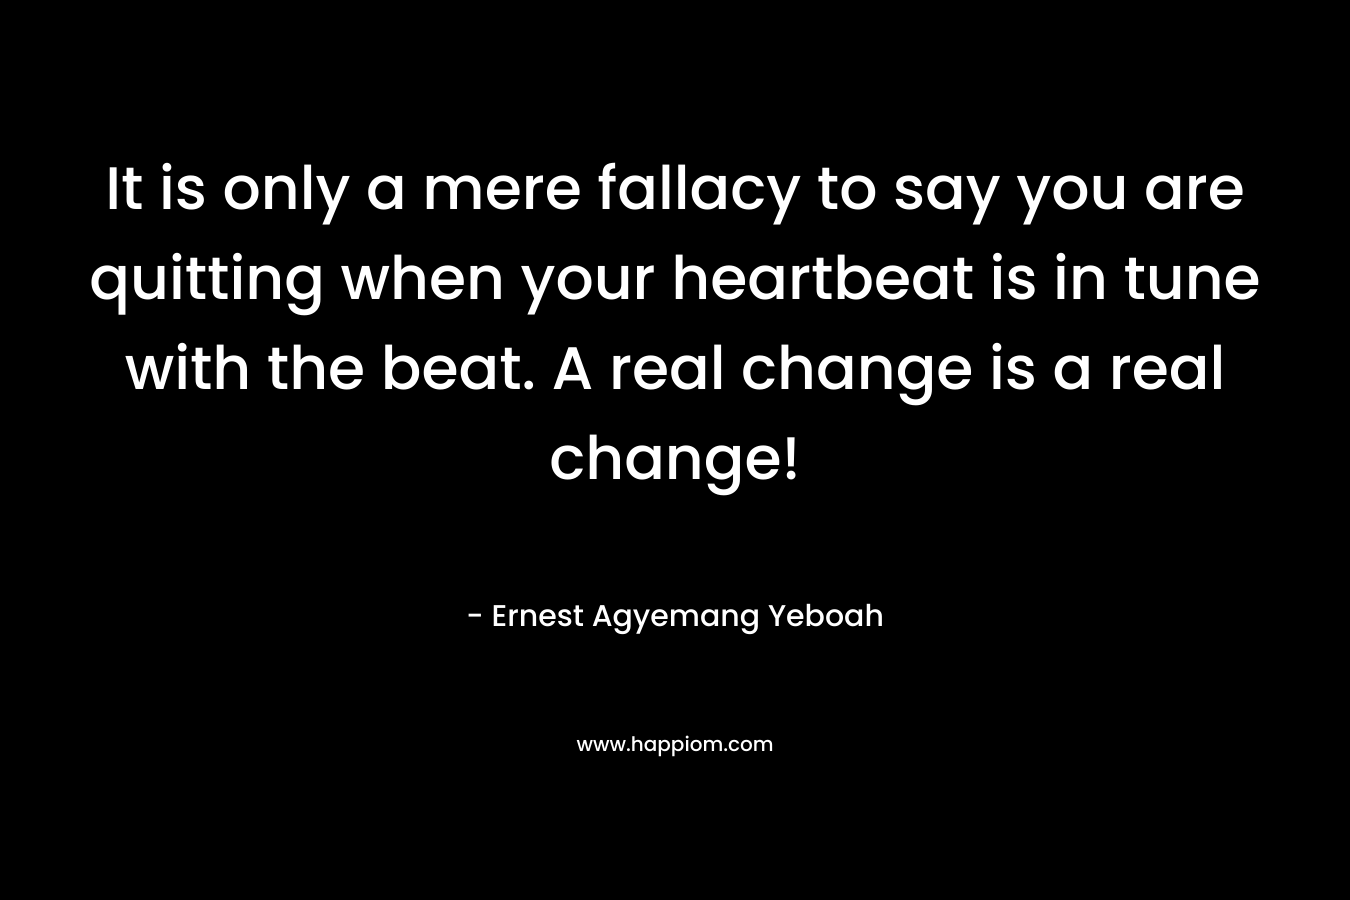 It is only a mere fallacy to say you are quitting when your heartbeat is in tune with the beat. A real change is a real change!